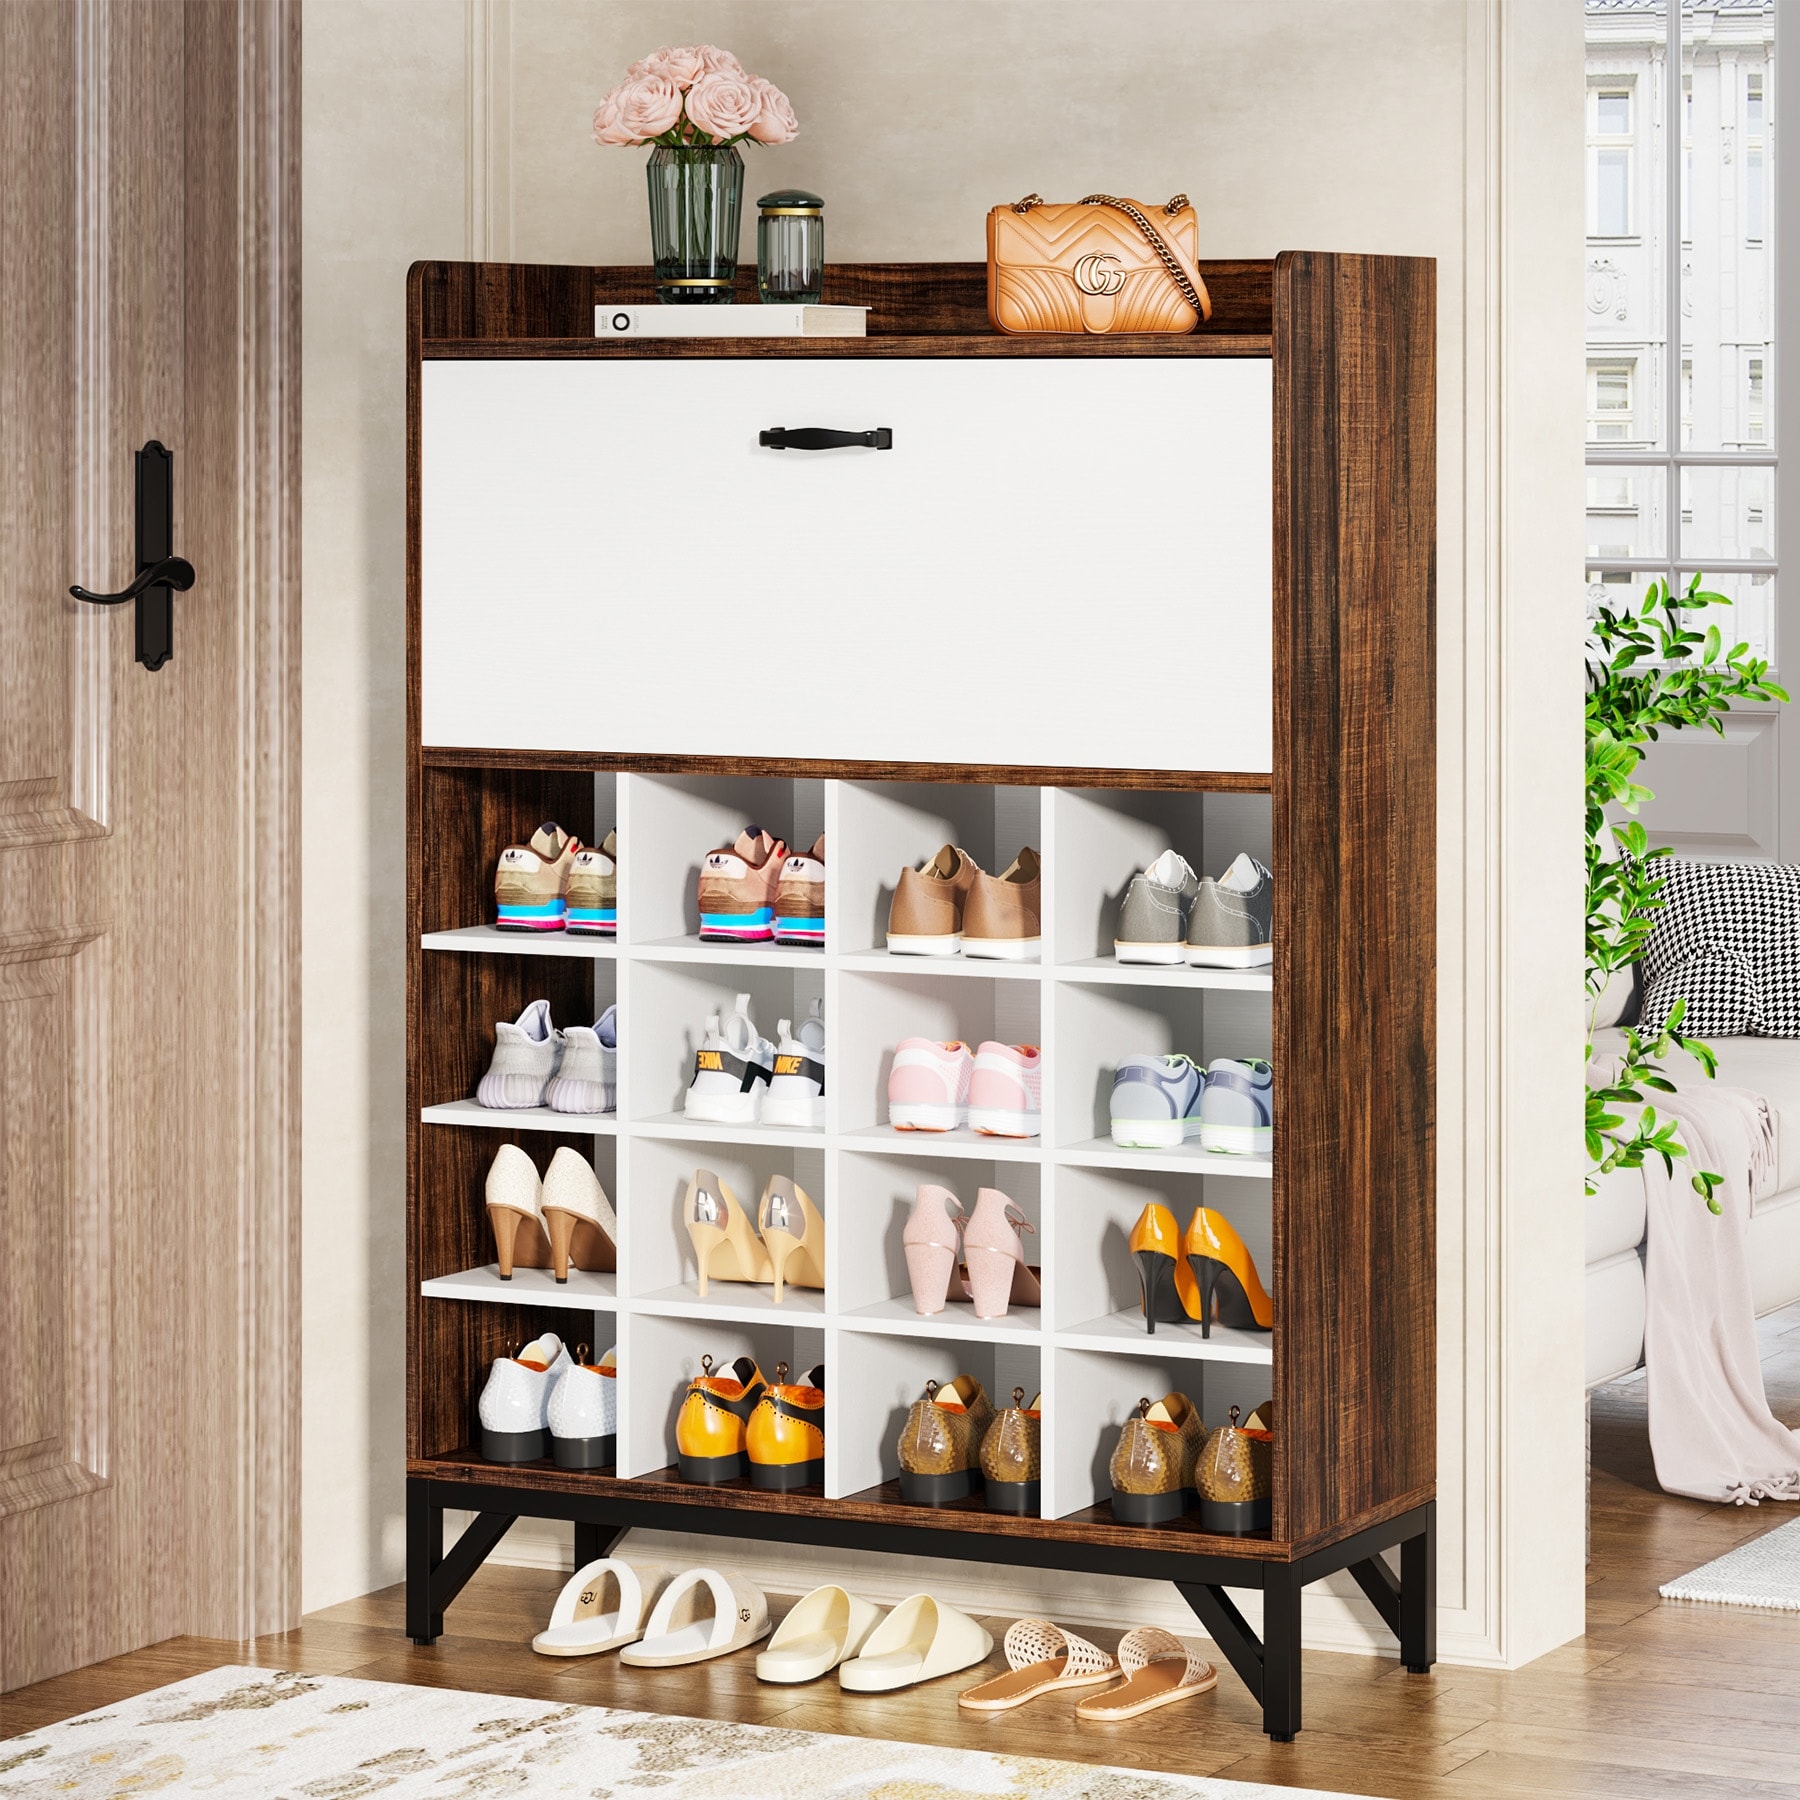 https://ak1.ostkcdn.com/images/products/is/images/direct/3615a0a9a3daa2b296b6516d7afab5f982e349fb/Freestanding-Shoe-Storage-Cabinet-for-Entryway%2C-Wooden-Narrow-Shoe-Rack-Organizer.jpg